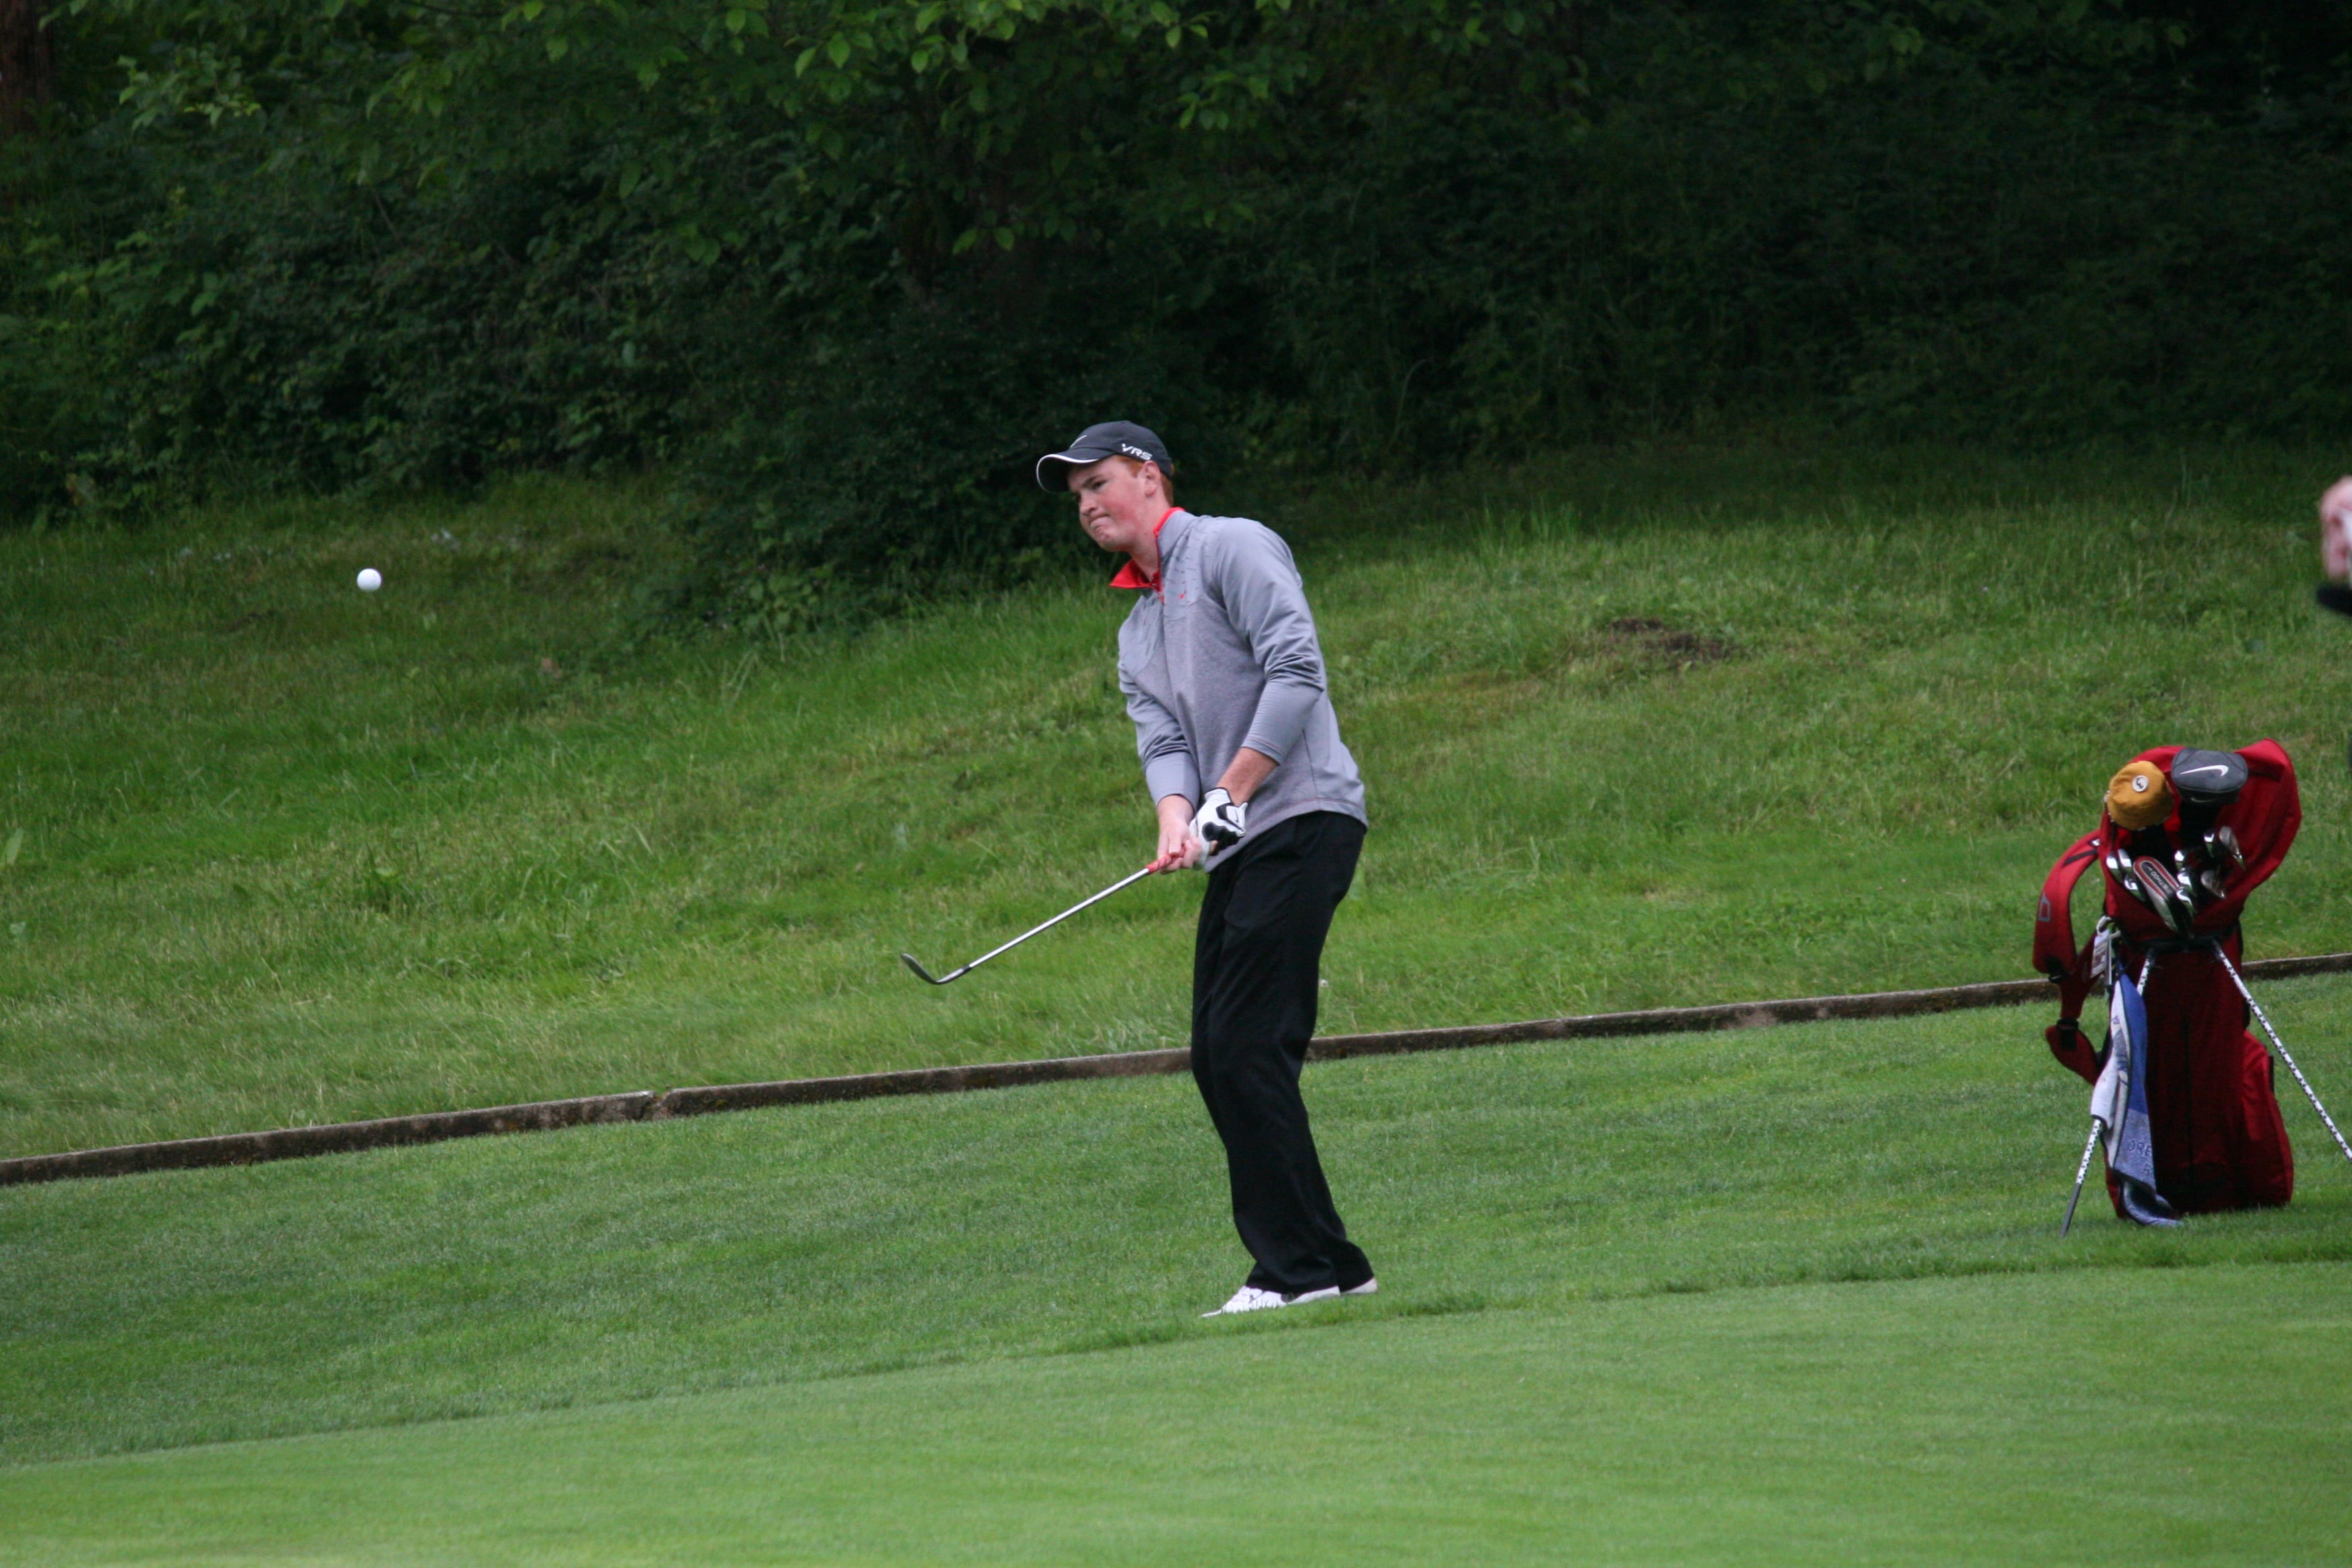 Brian Humphreys chips on to the ninth green during the final round of the state tournament, at Camas Meadows. The CHS sophomore shot 3-under par Thursday to finish in second place.